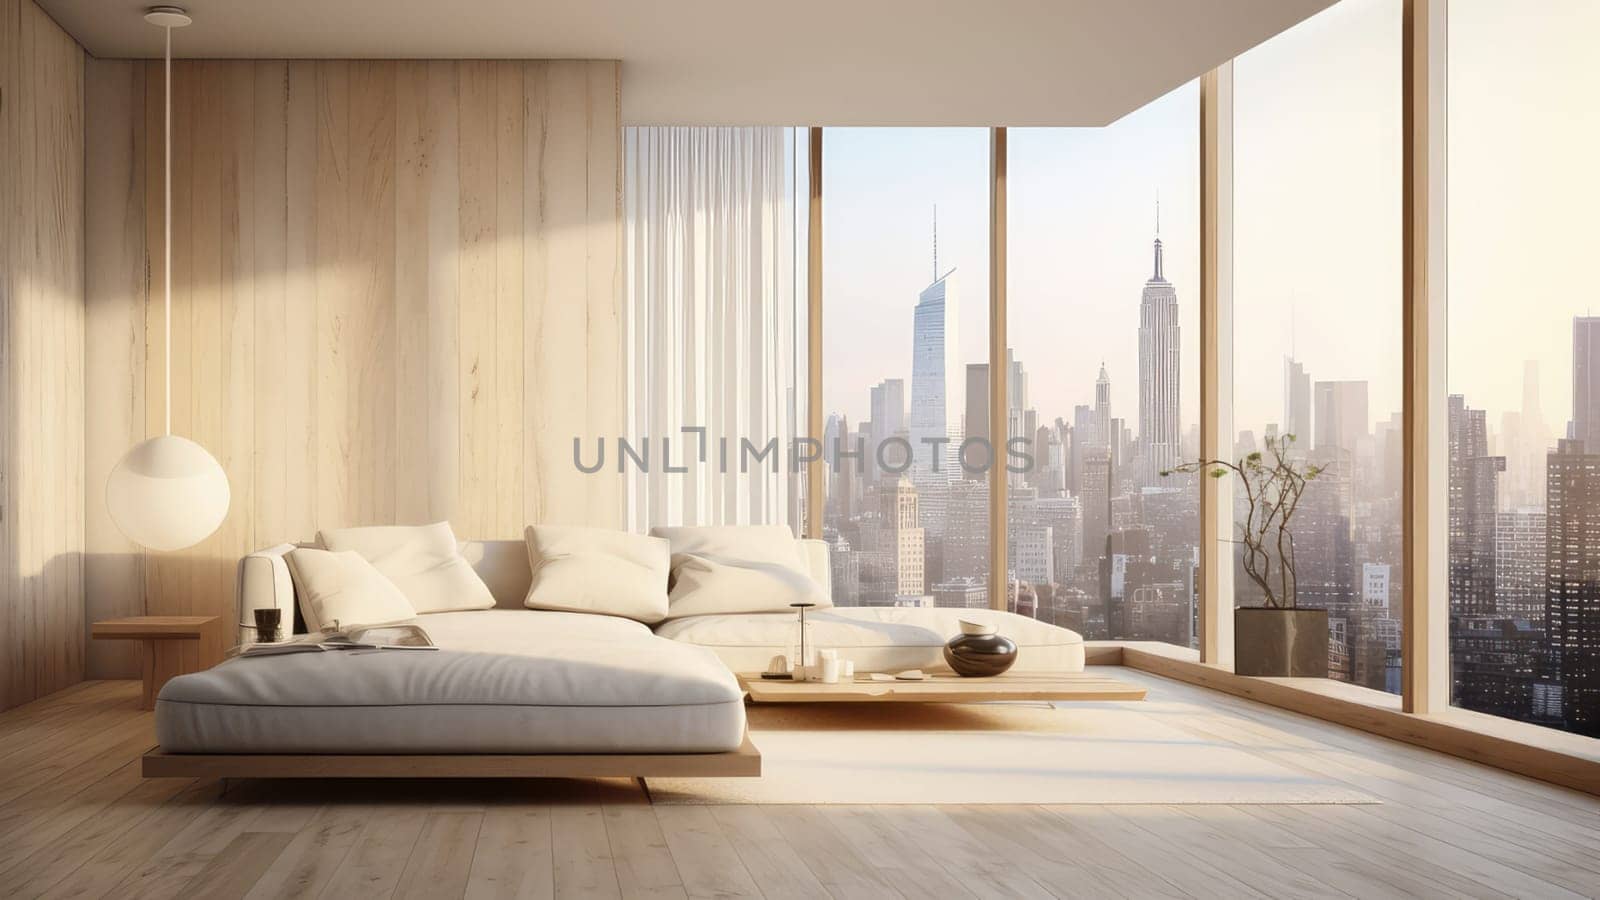 3D rendering of a cozy living room with a city view from window. The room is filled with comfortable furniture, including a sofa, armchairs, and ceiling lamp.